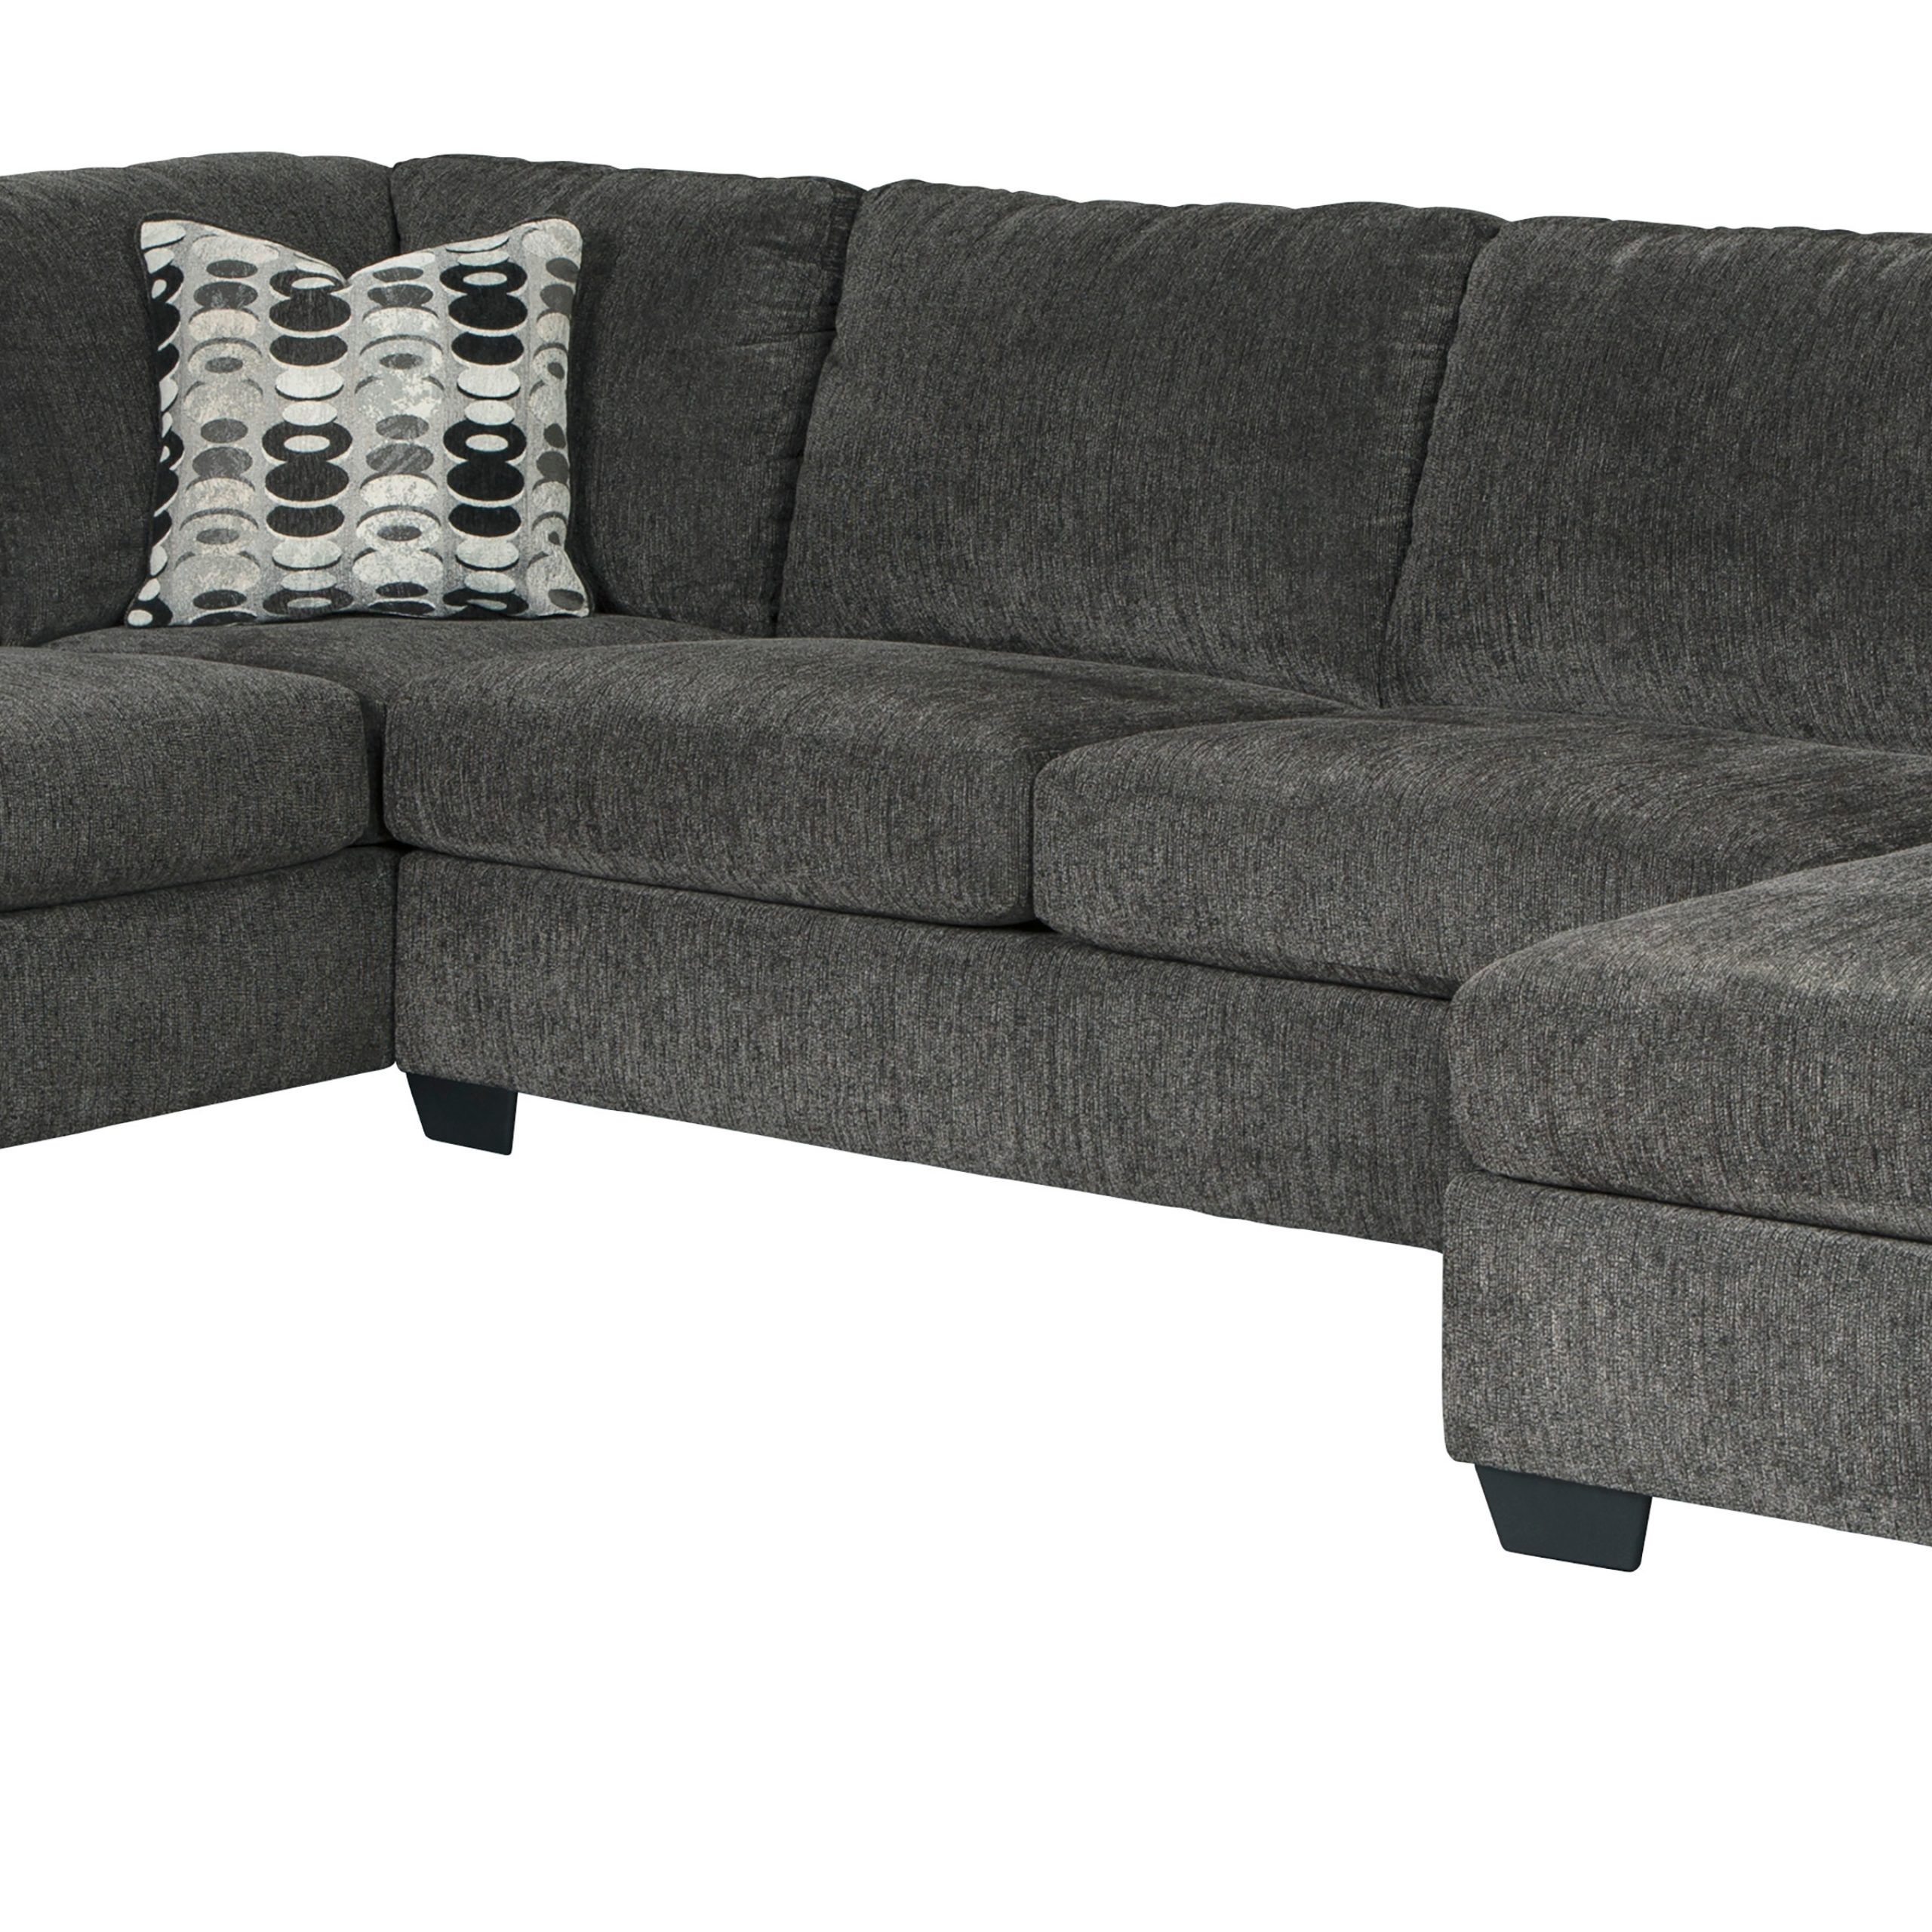 Ballinasloe 3 Piece Sectional With Chaise 80703s2 Throughout 3 Piece Console Tables (View 8 of 20)